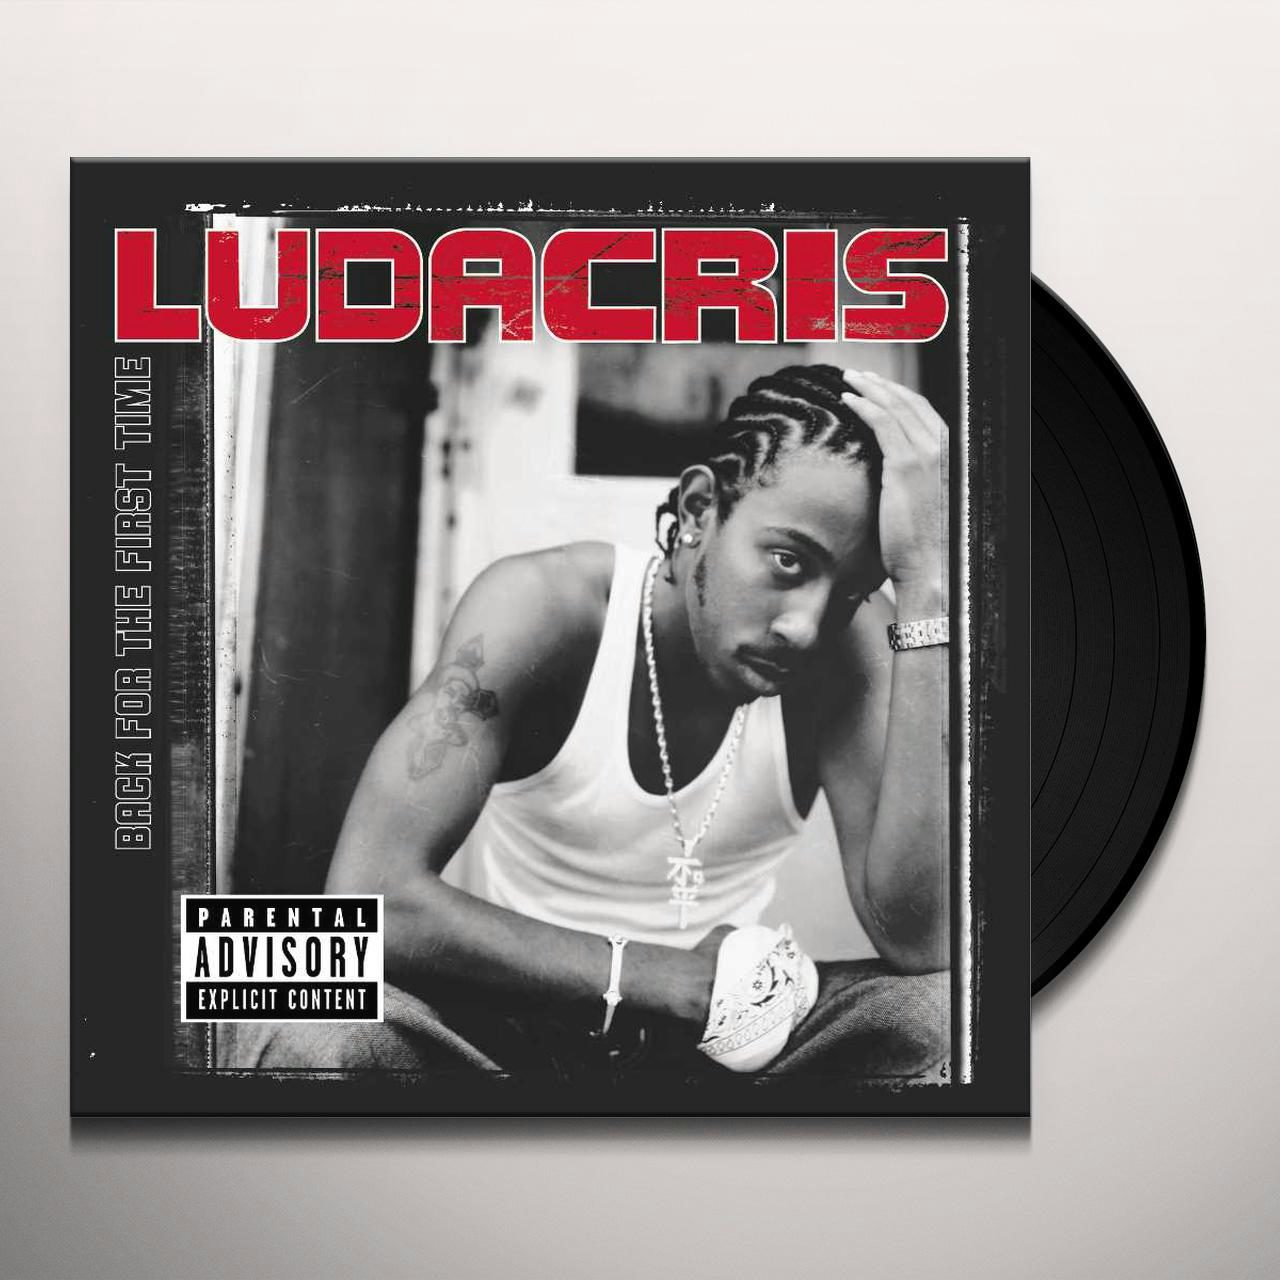 Say get back. Ludacris back for the first time album. Rollout Ludacris. Ludacris 2000. Ludacris альбомы.